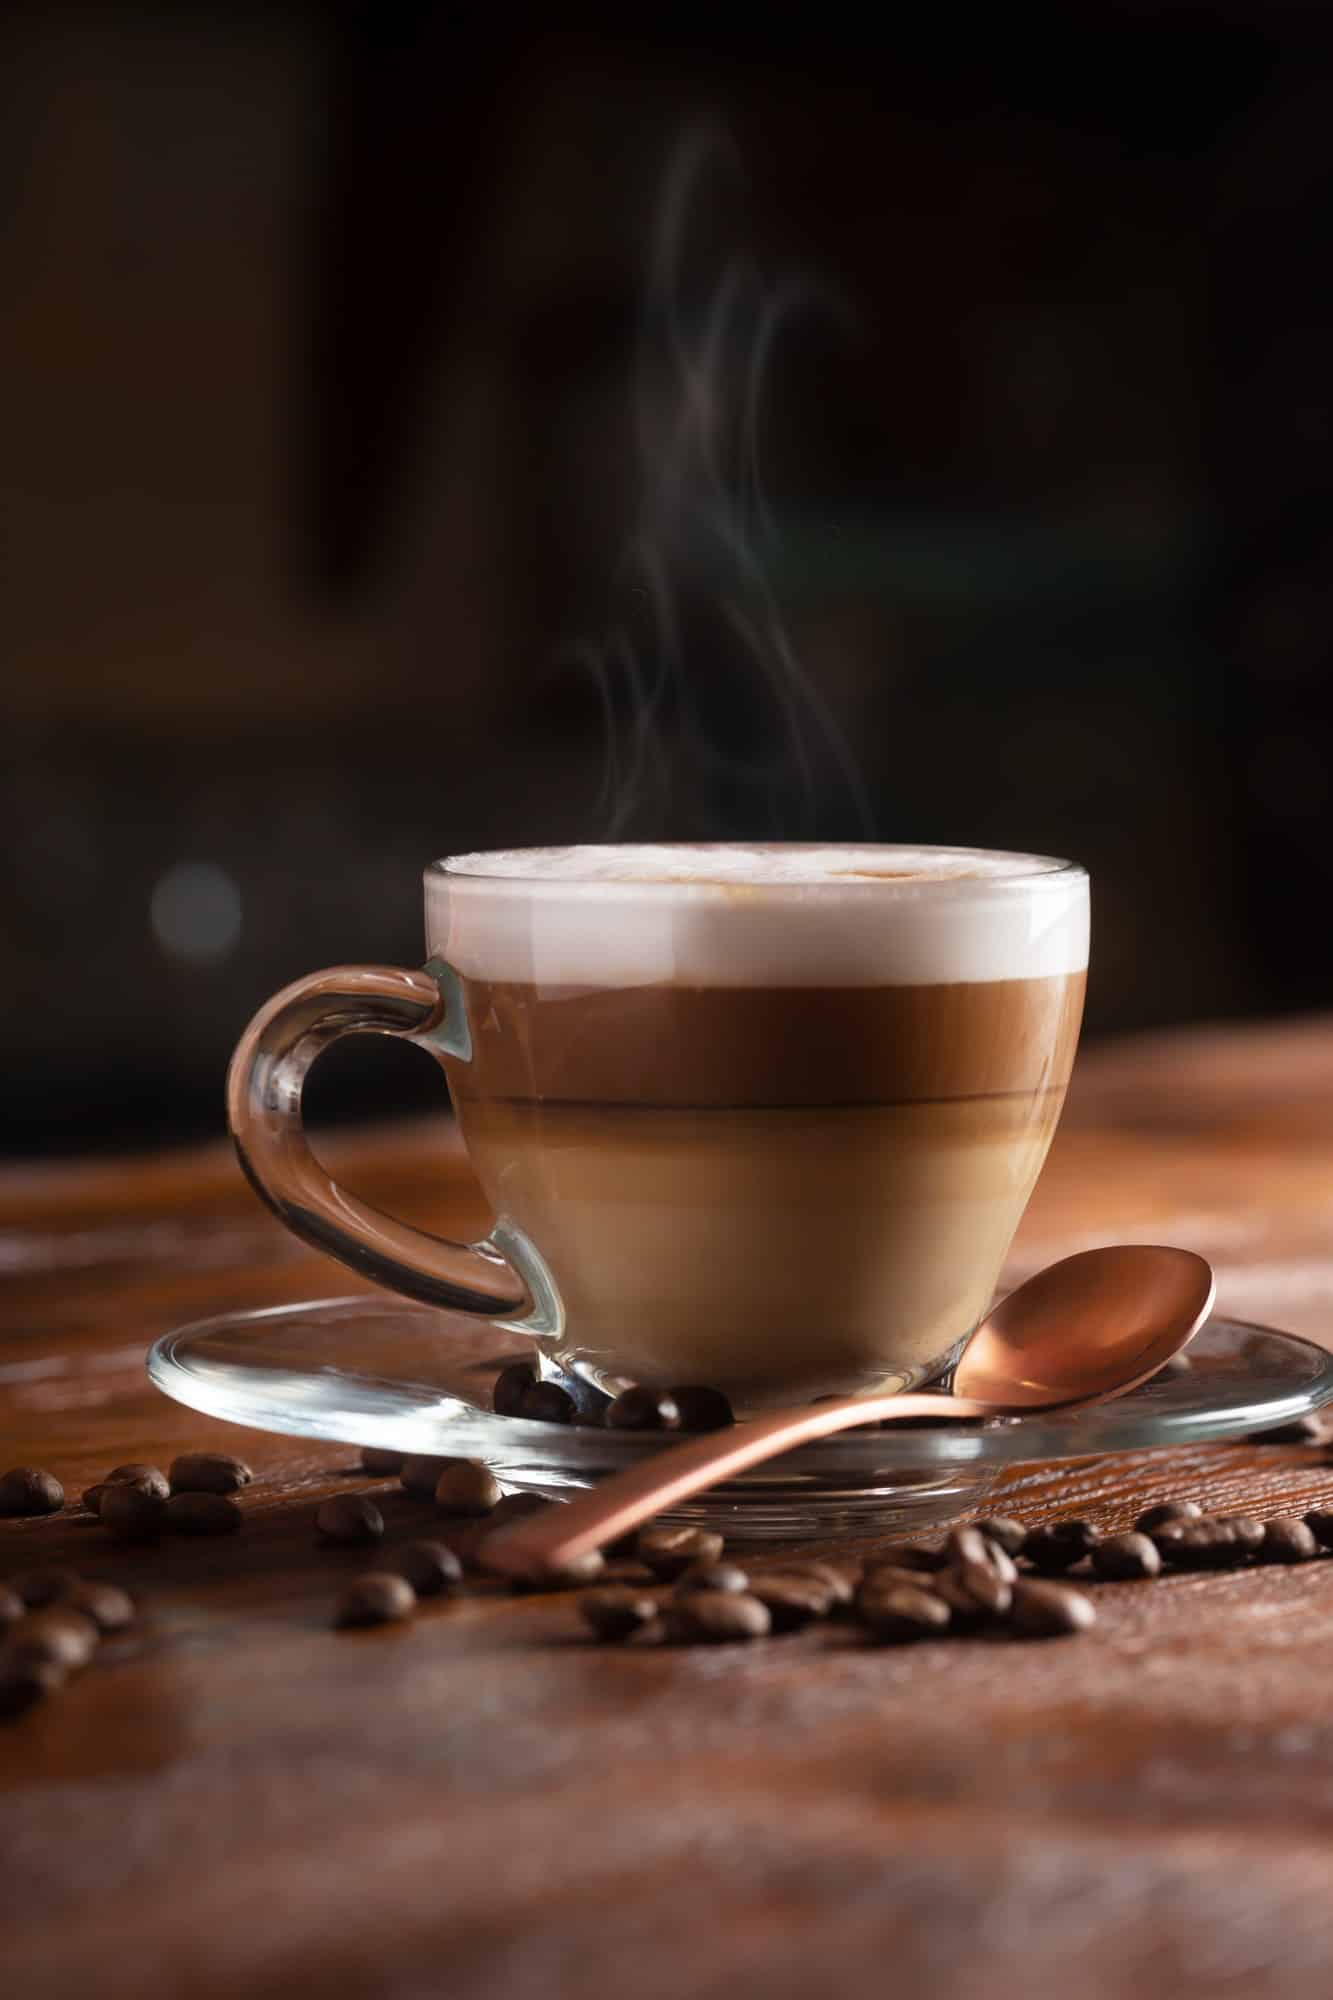 Cup of Coffe With Milk on a Dark Background. Hot Latte or Cappuccino Prepared With Milk